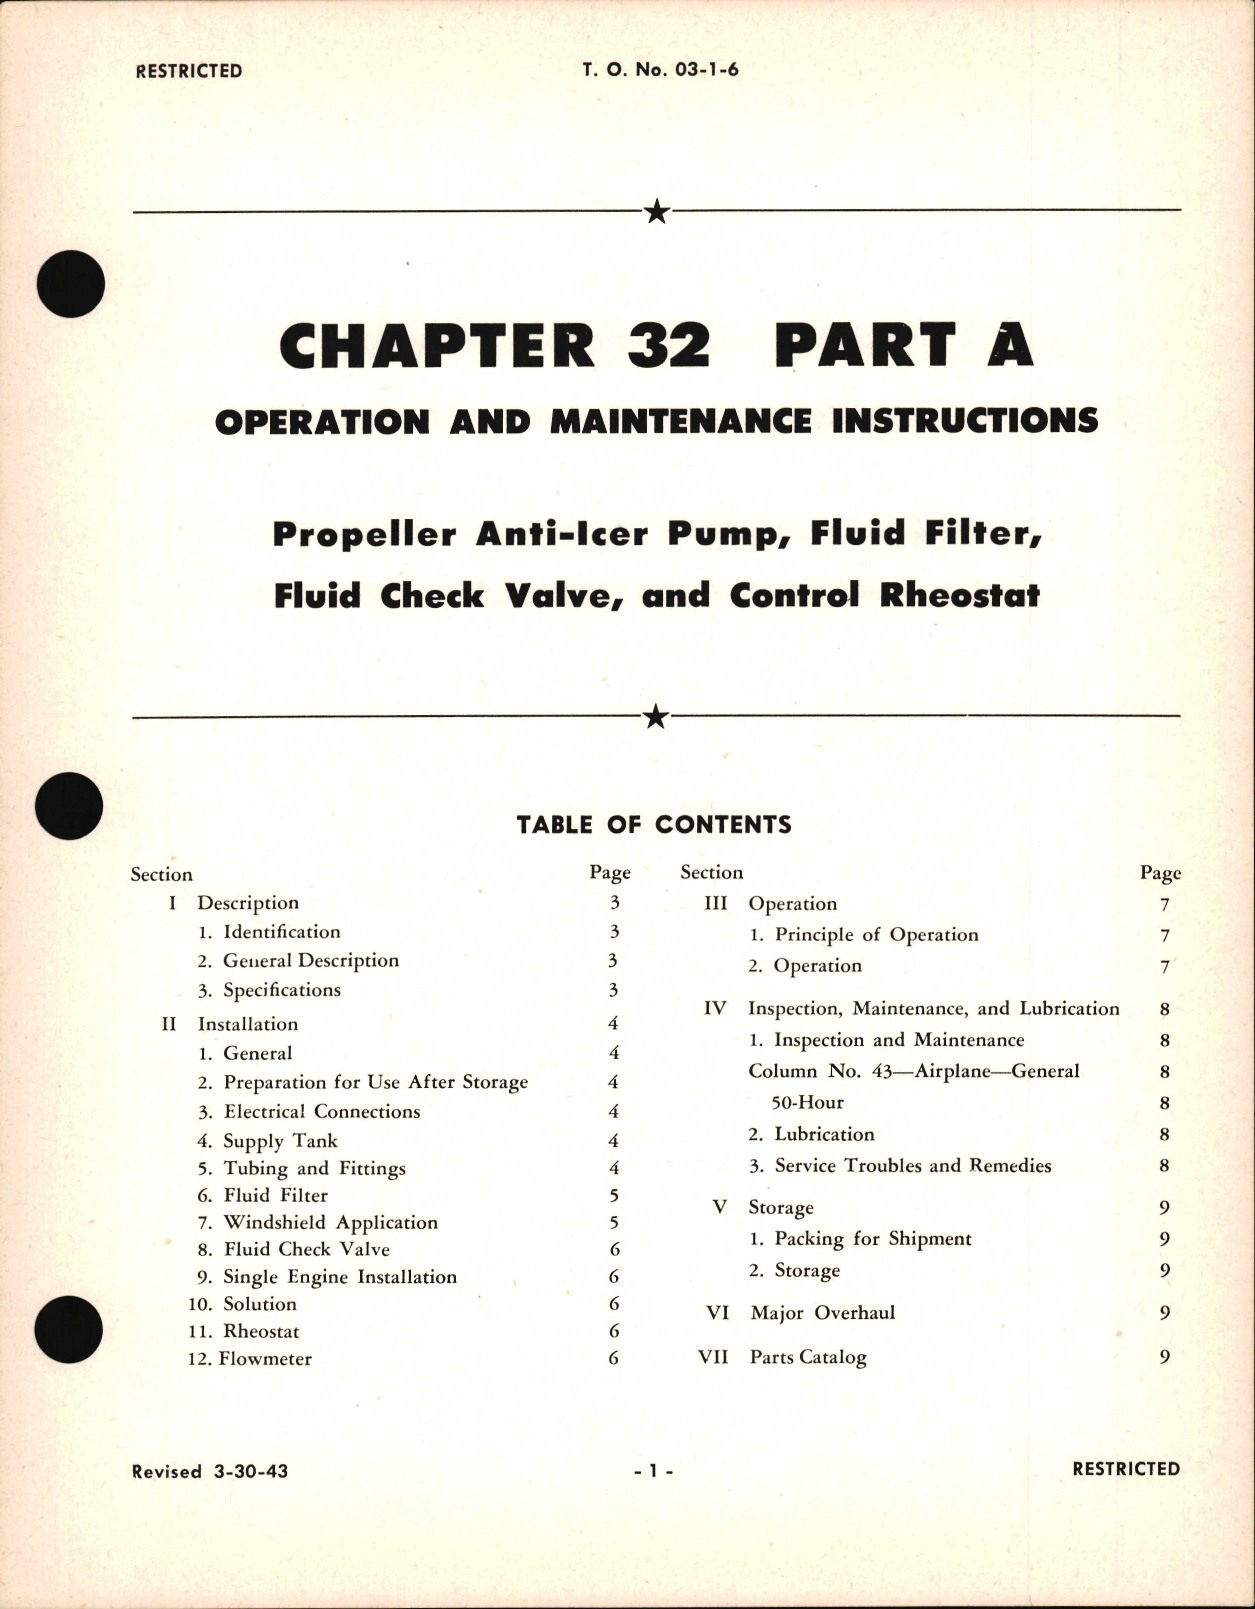 Sample page 1 from AirCorps Library document: Operation and Maintenance Instruction for Propeller Anti-Icer Pump, Fluid Filter, Fluid Check Valve, and Control Rheostat, Chapter 32 Part A